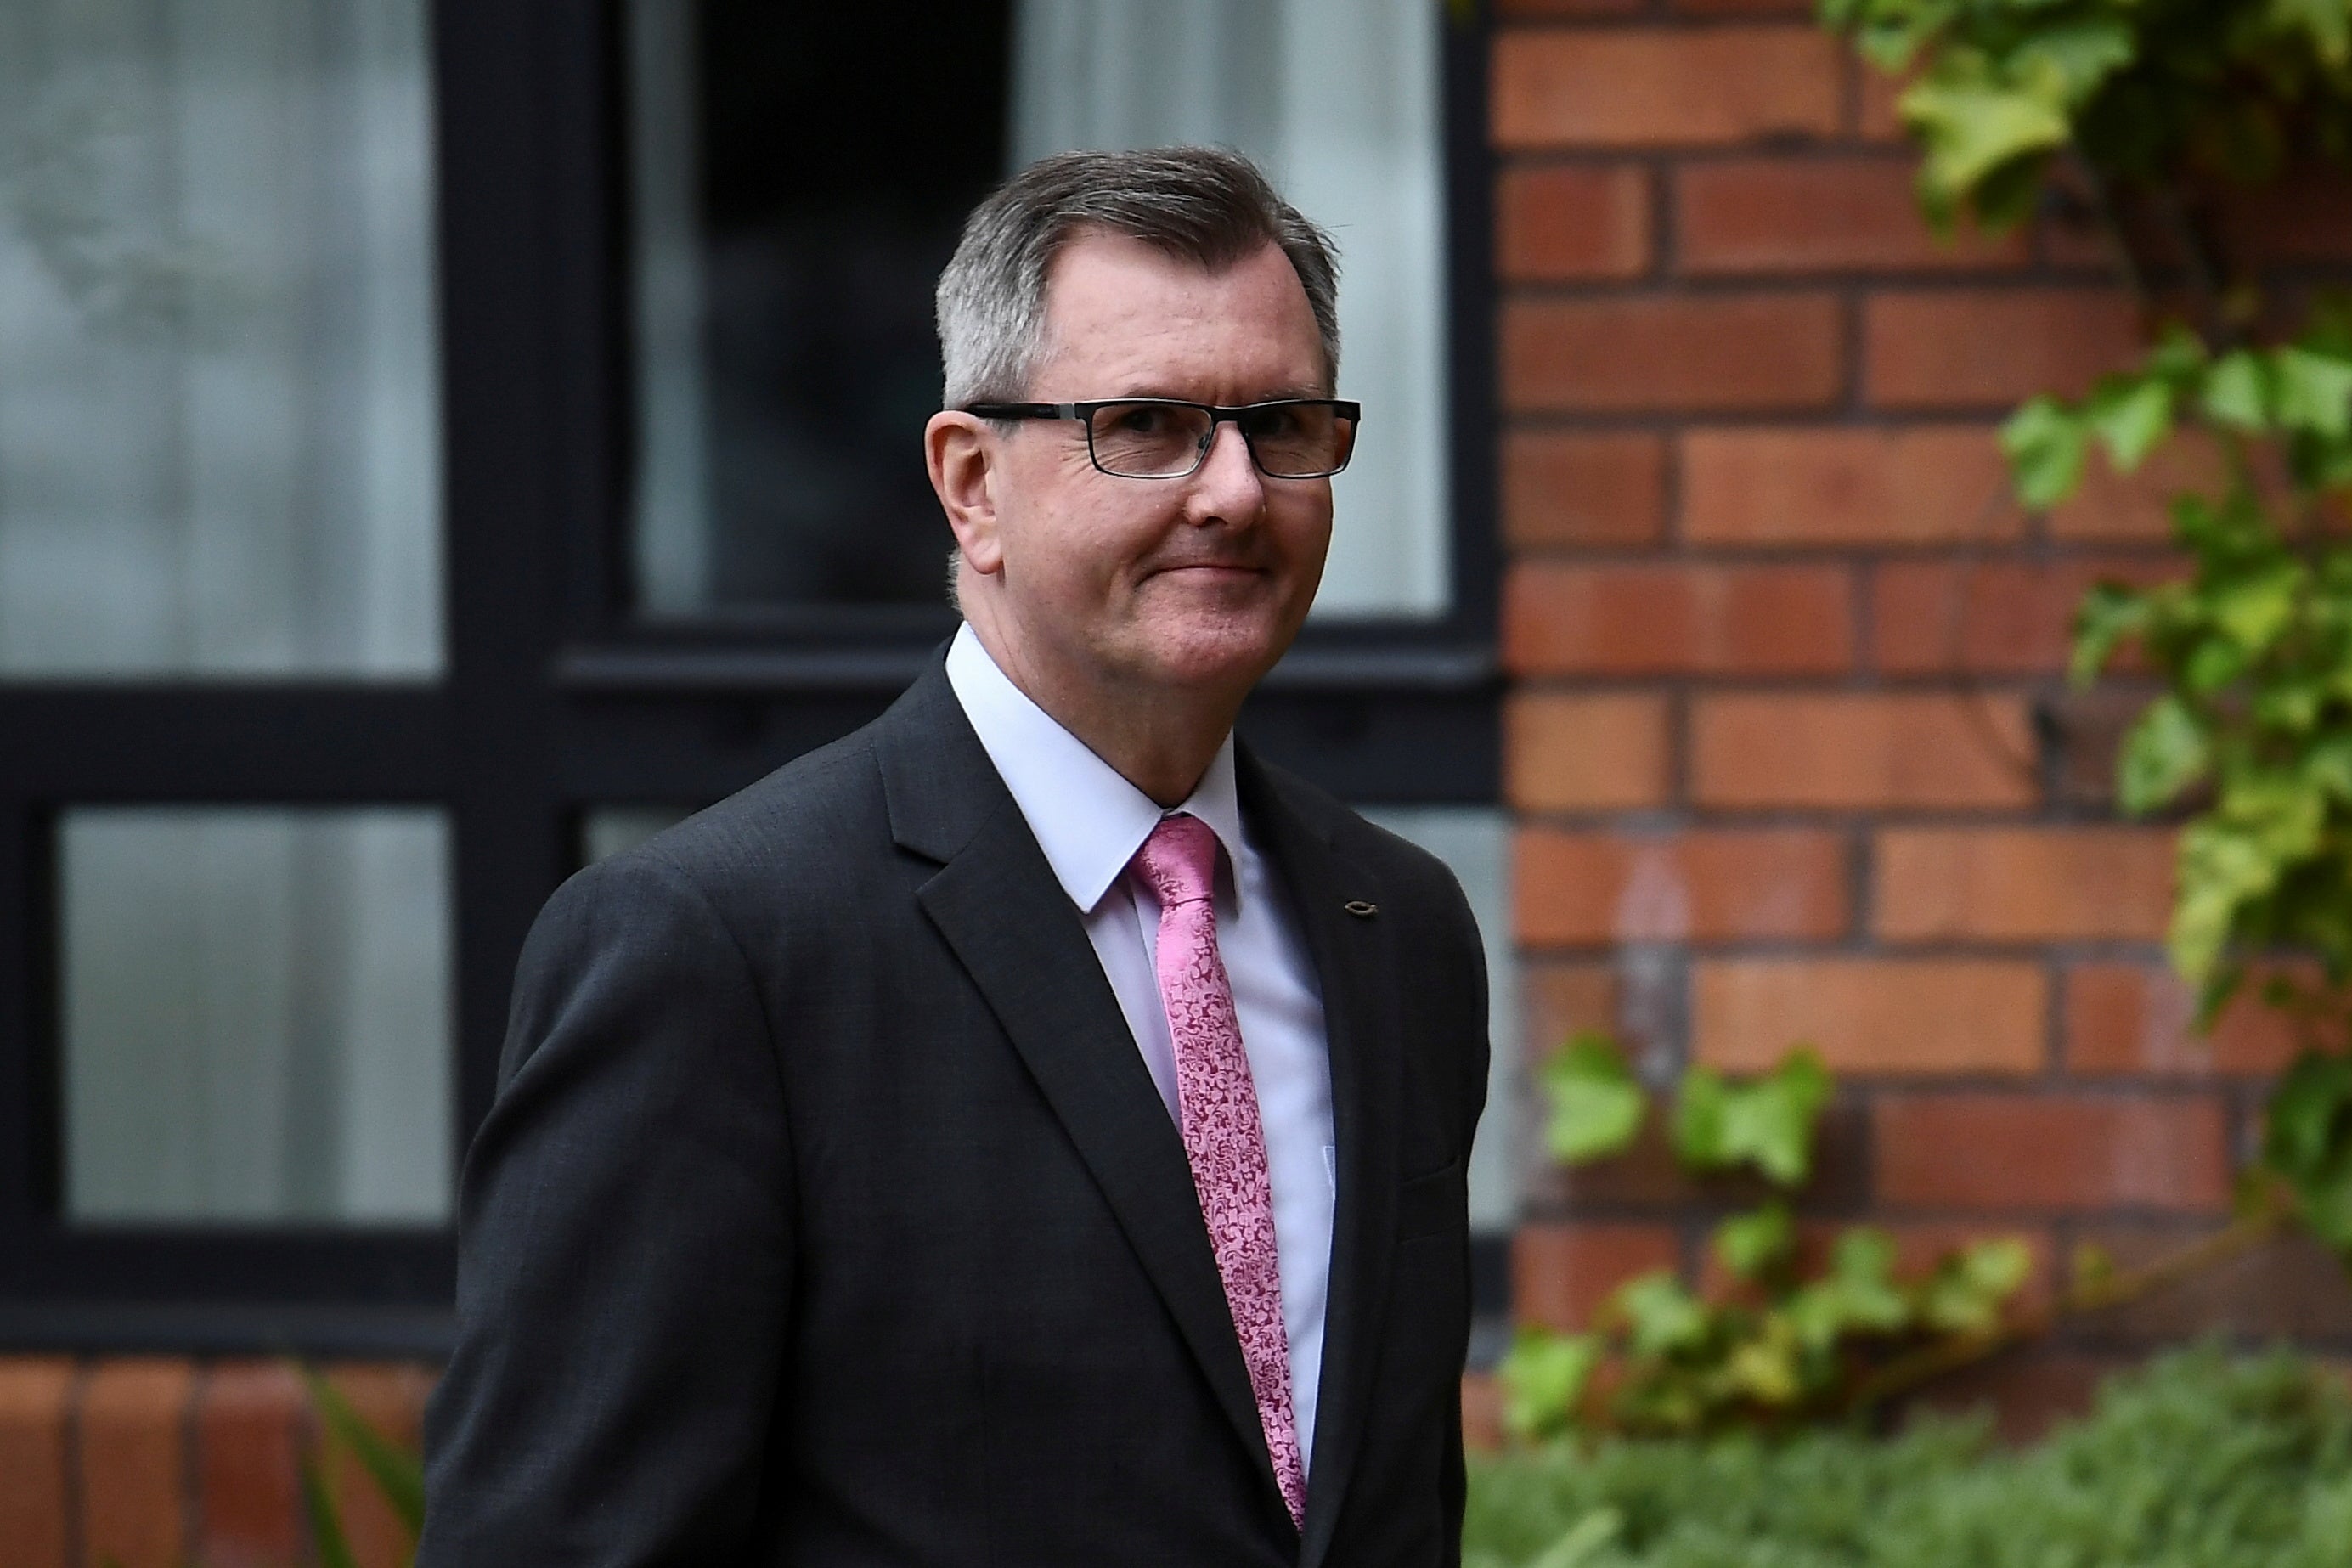 Sir Jeffrey is the province’s longest-serving MP, but is likely to quit his Lagan Valley seat after 24 years in order to become the new first minister at Stormont